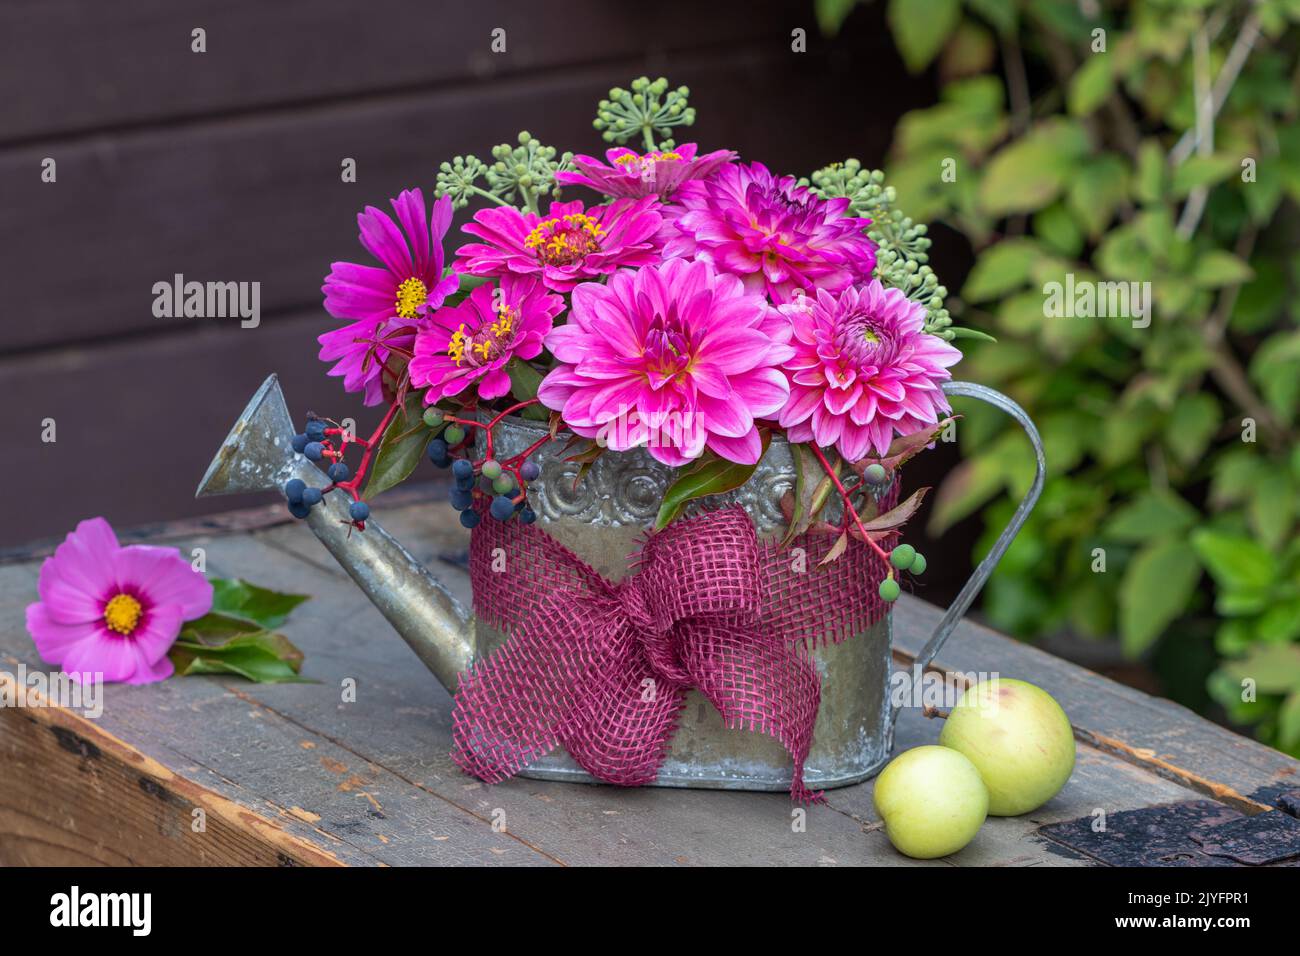 floral arrangement with pink dahlias, zinnias and cosmos flowers in decorative watering can Stock Photo